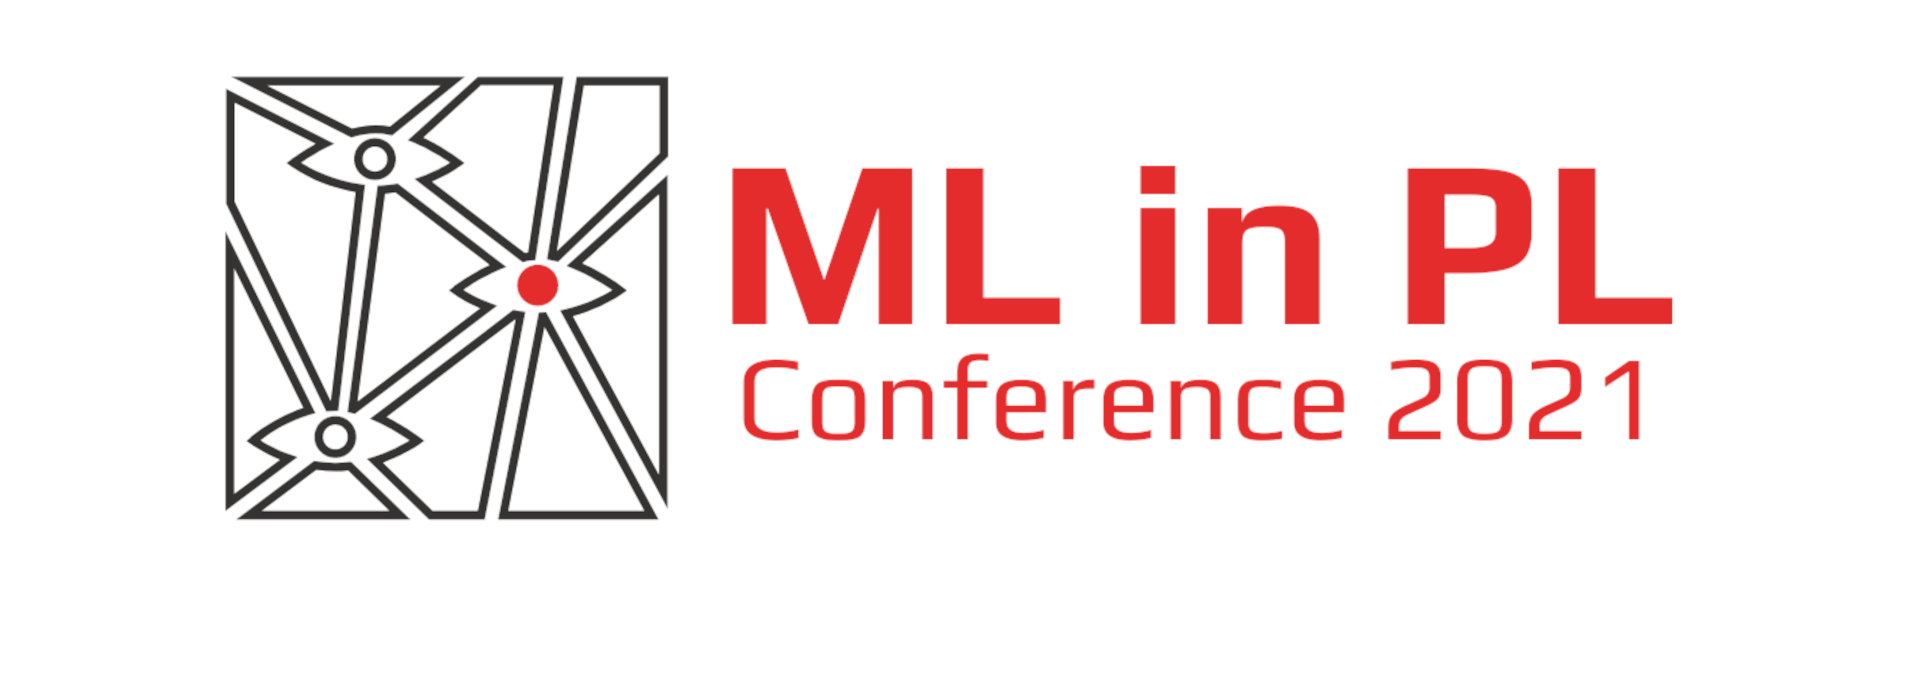 deepsense.ai among top world experts sharing machine learning knowledge at ML in PL 2021